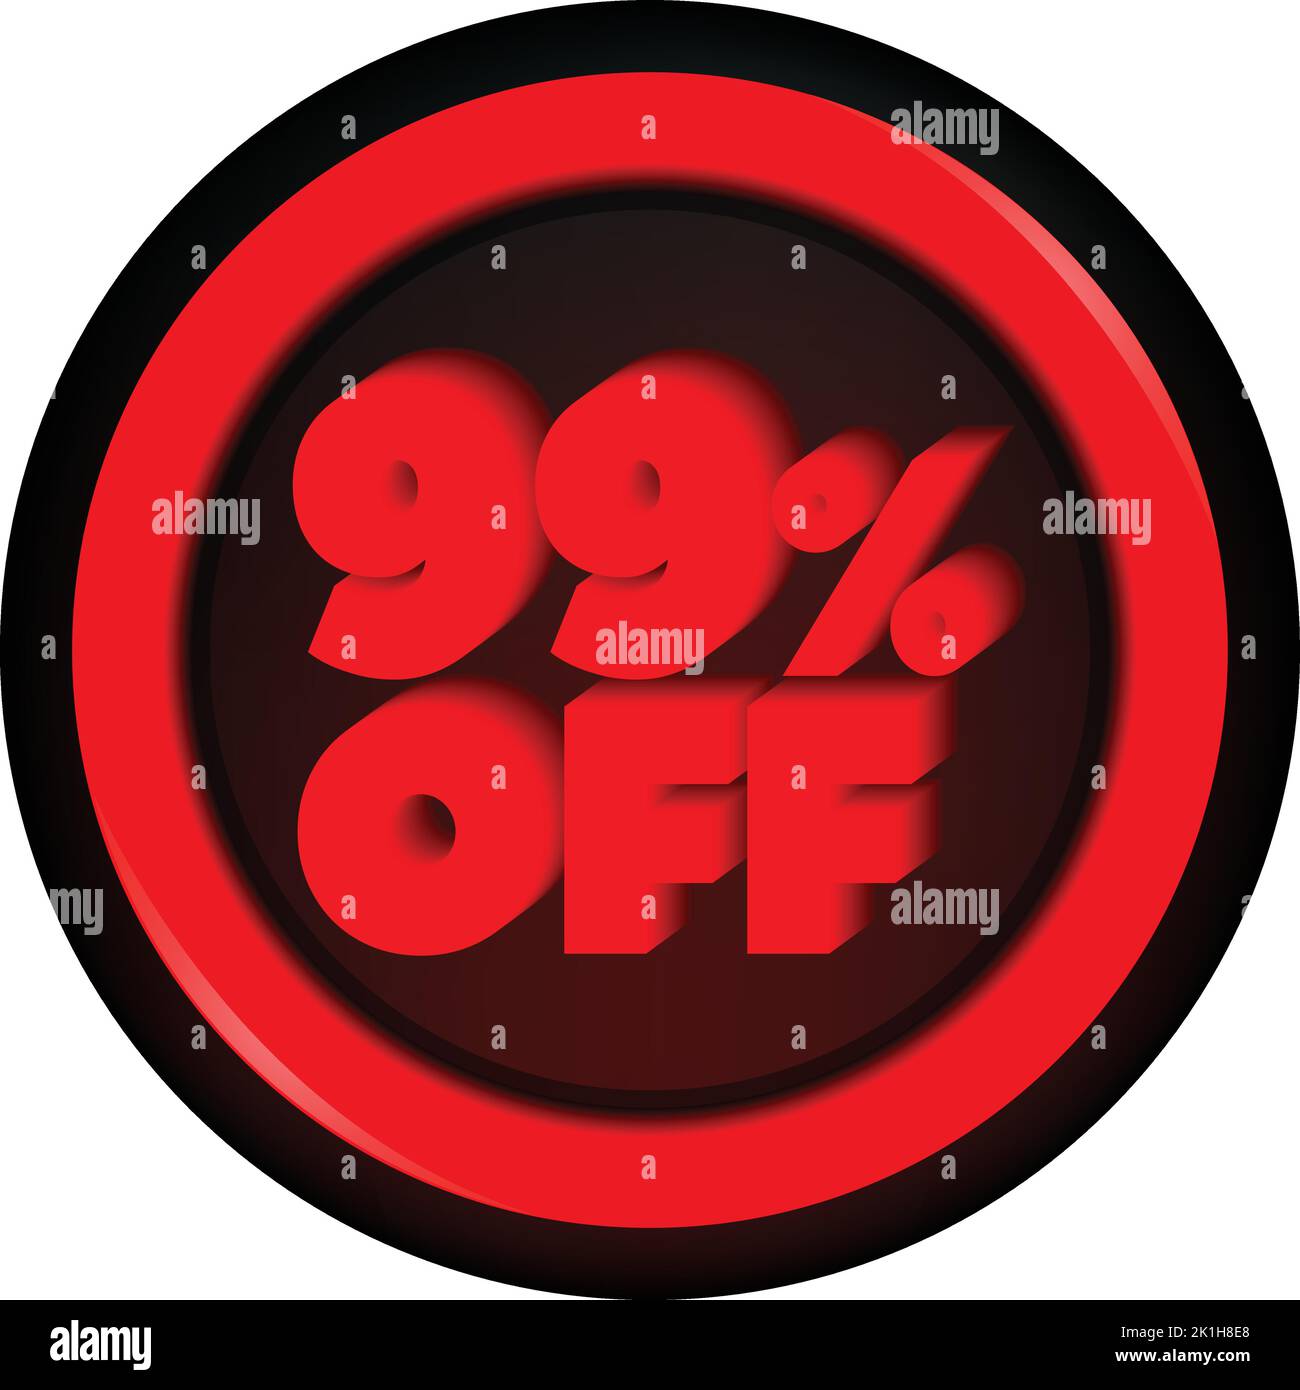 2 Dollar Only Coupon Sign Label Stock Vector (Royalty Free